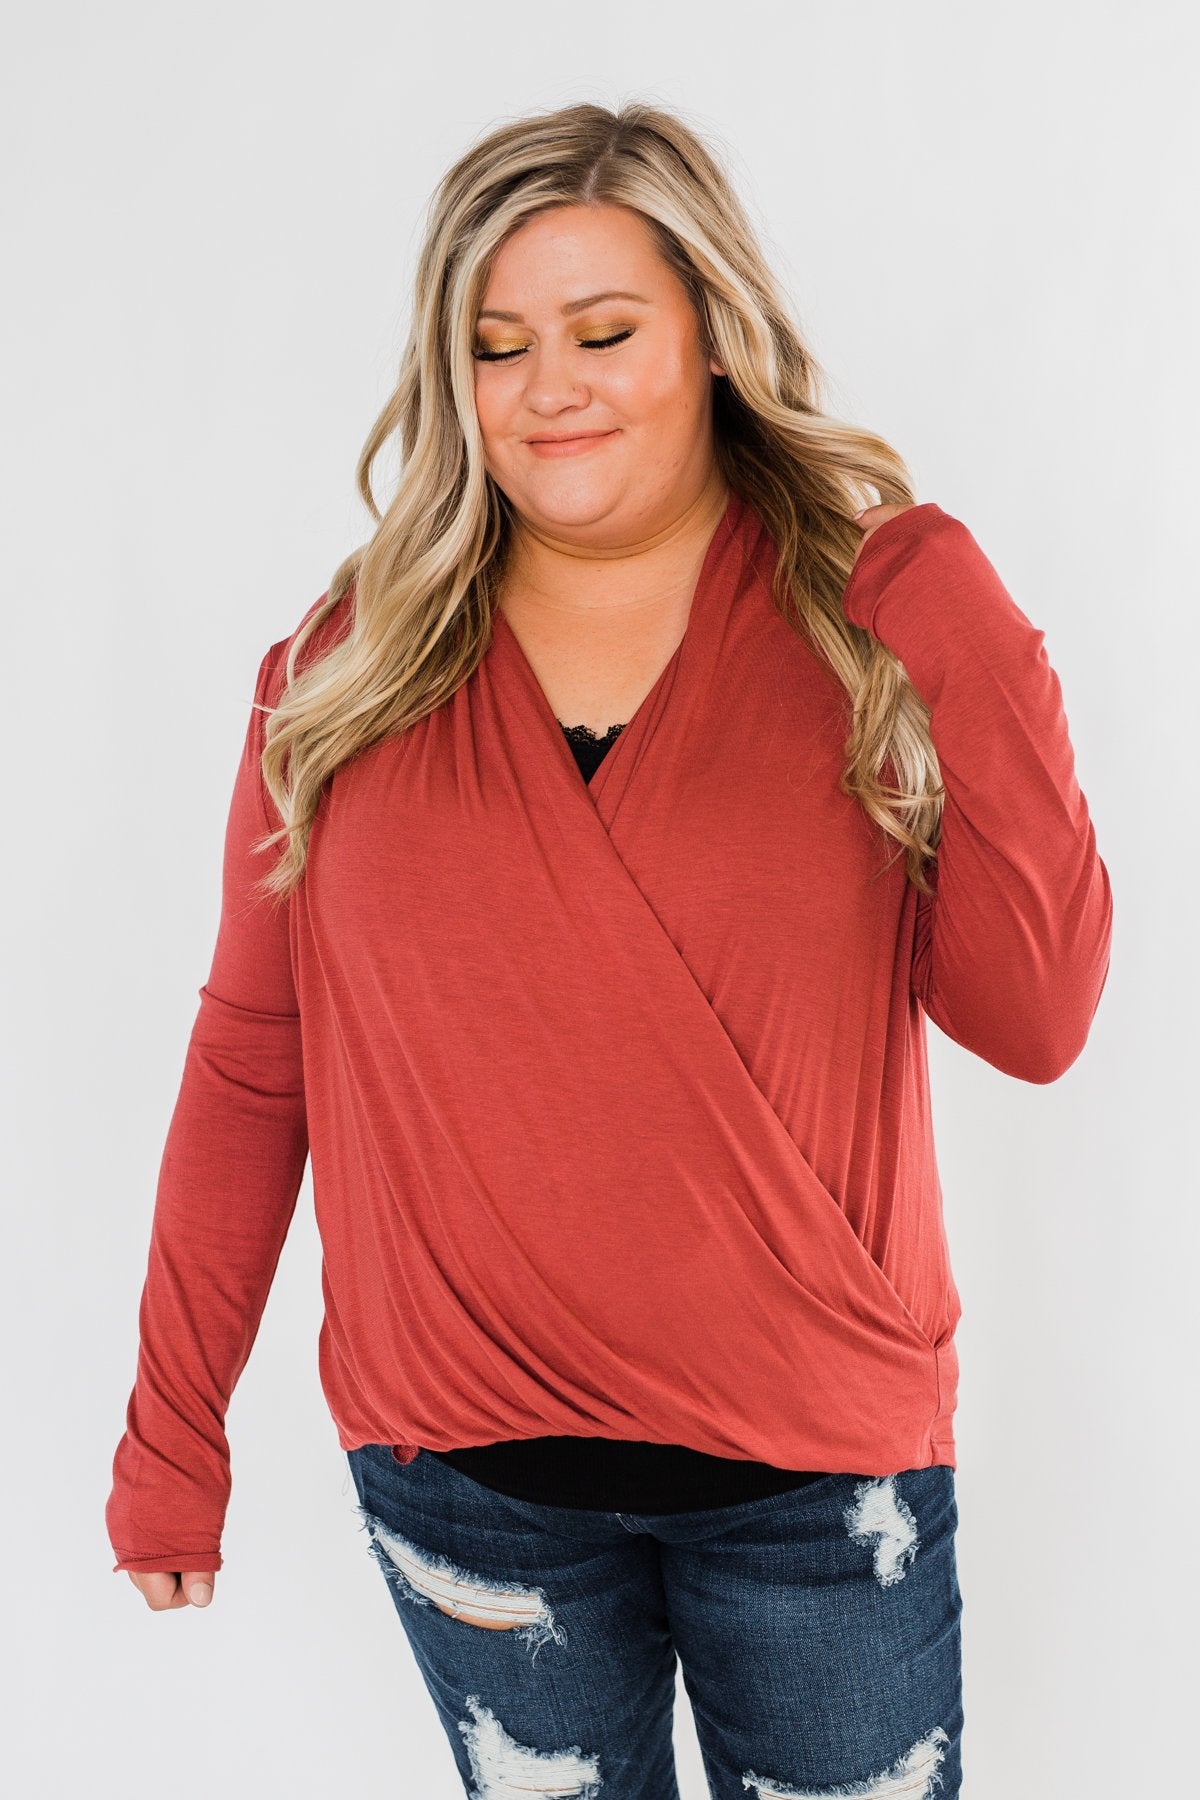 Can't Help This Feeling Front Wrap Top- Rusty Mauve